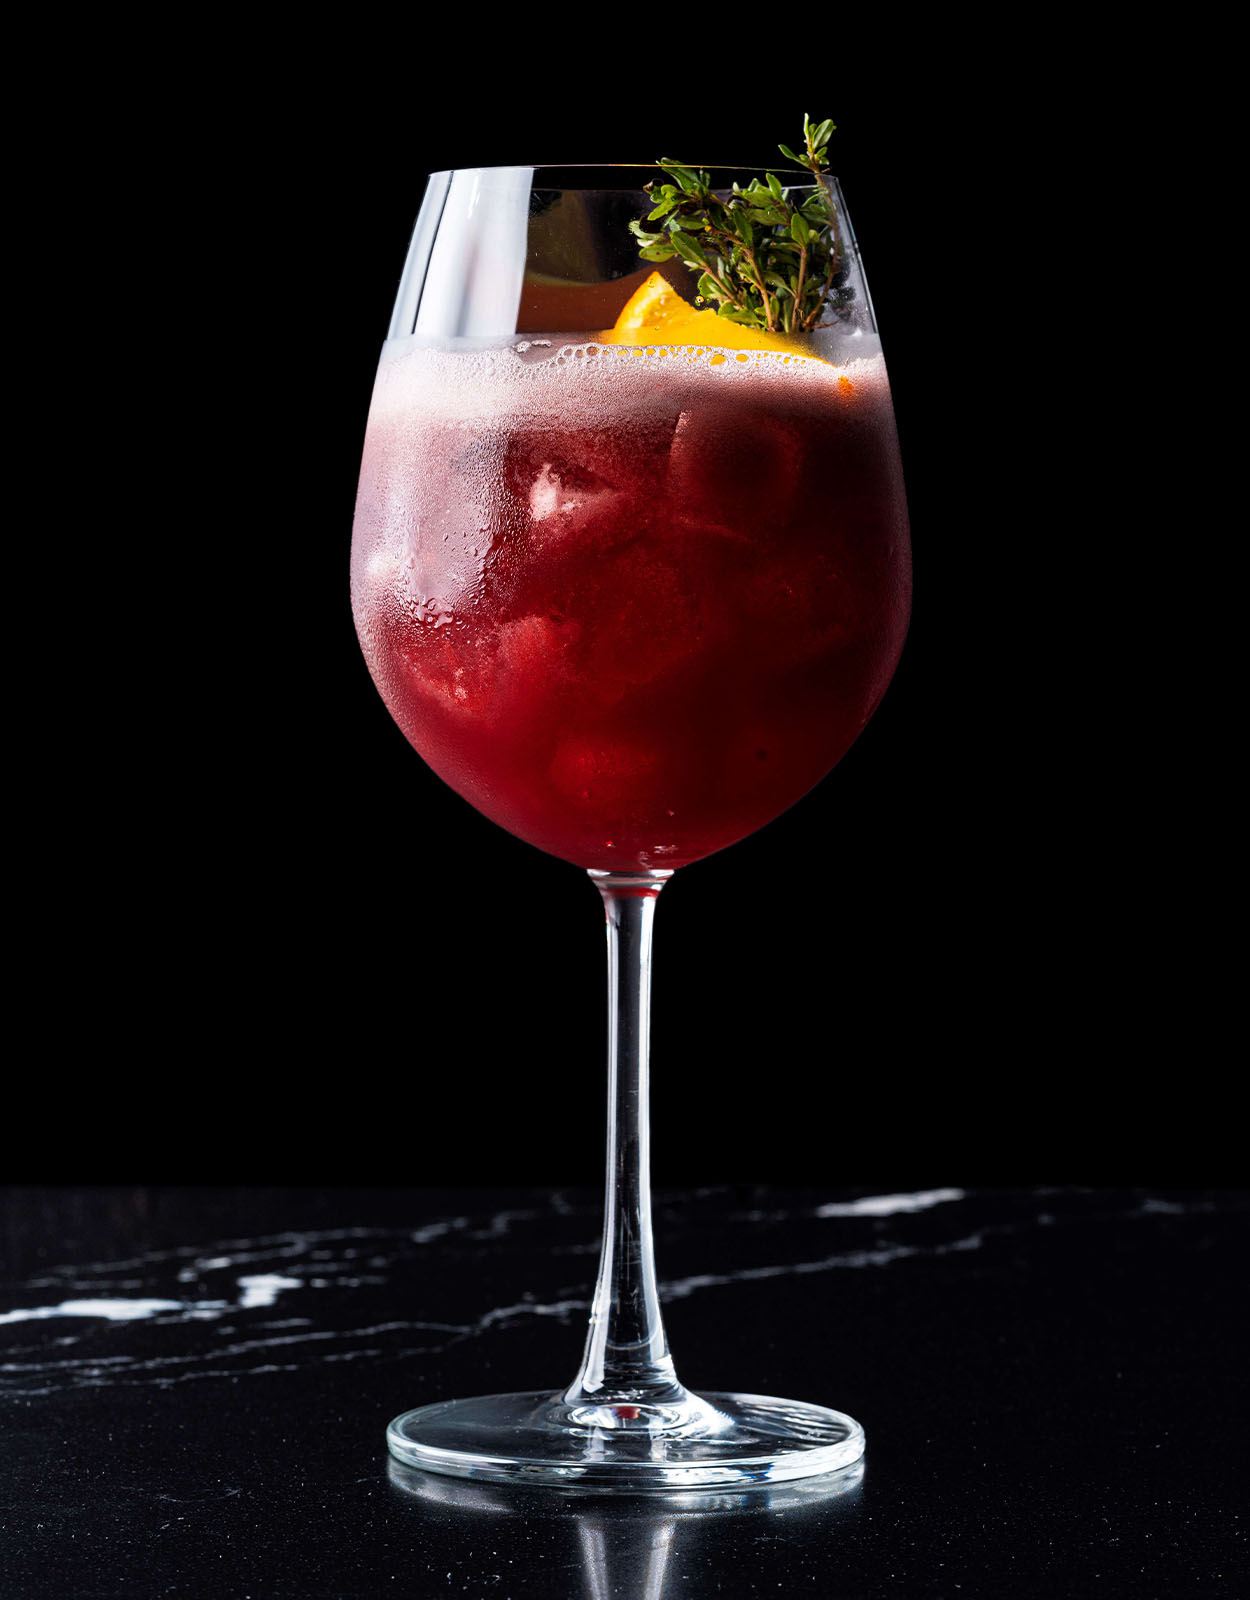 Sangria Tinto: red wine infused with fruits, dried orange, and rosemary